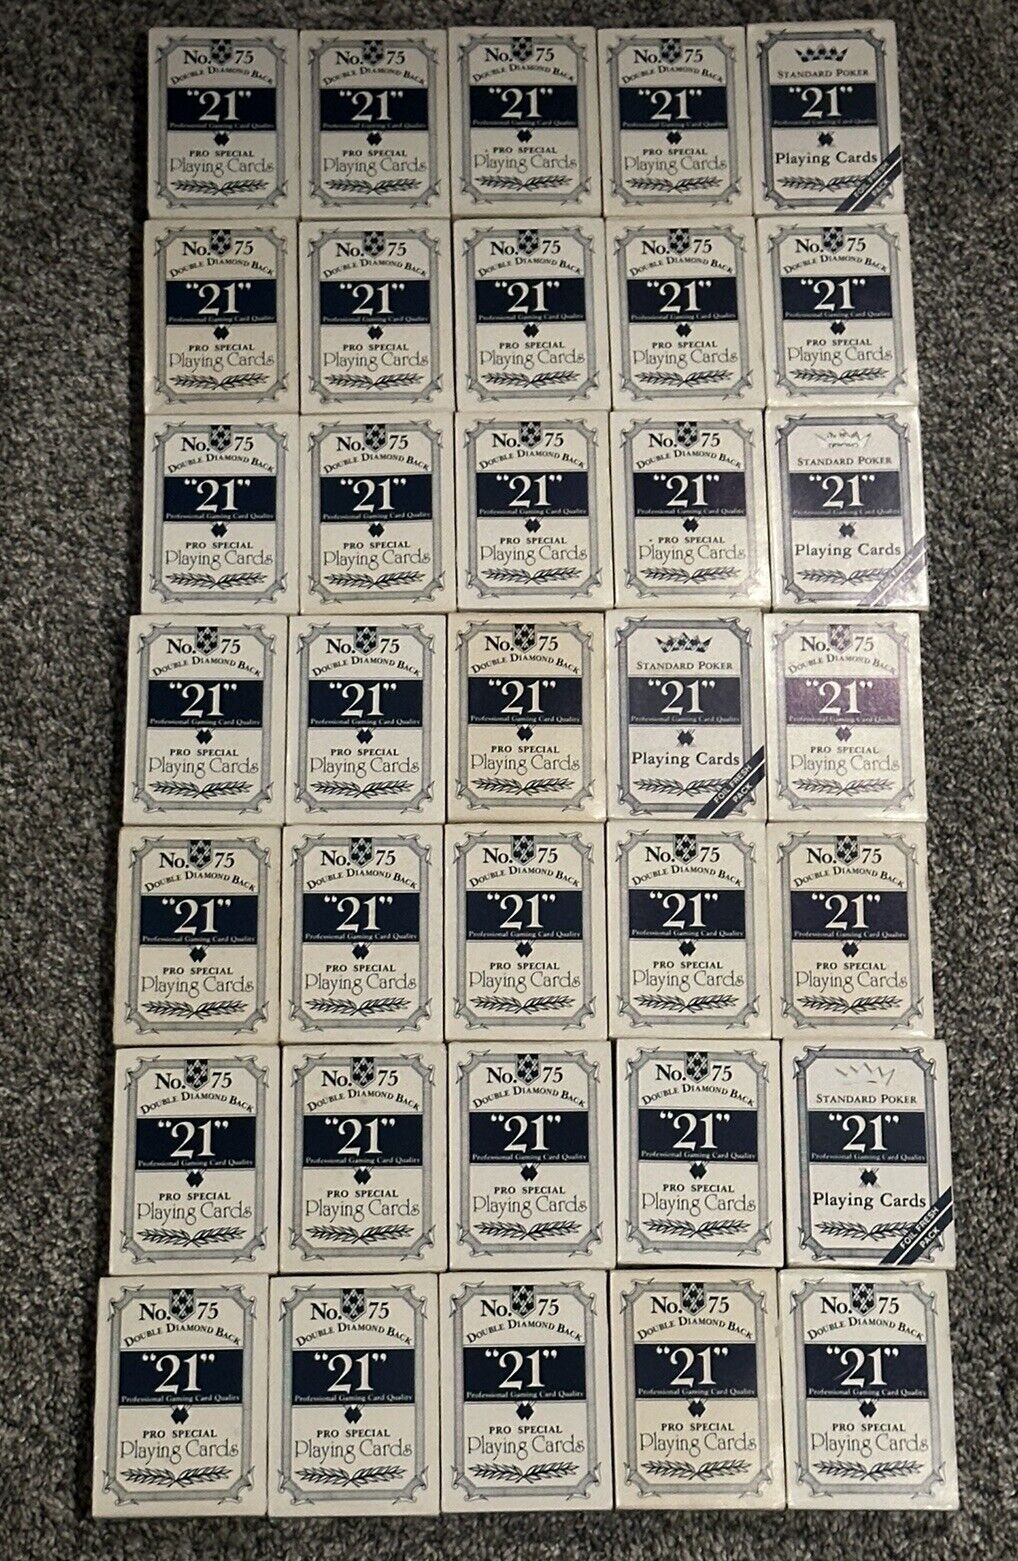 *Vintage lot of 35 ‘21’ Arrco Poker Playing Cards - Great Condition*